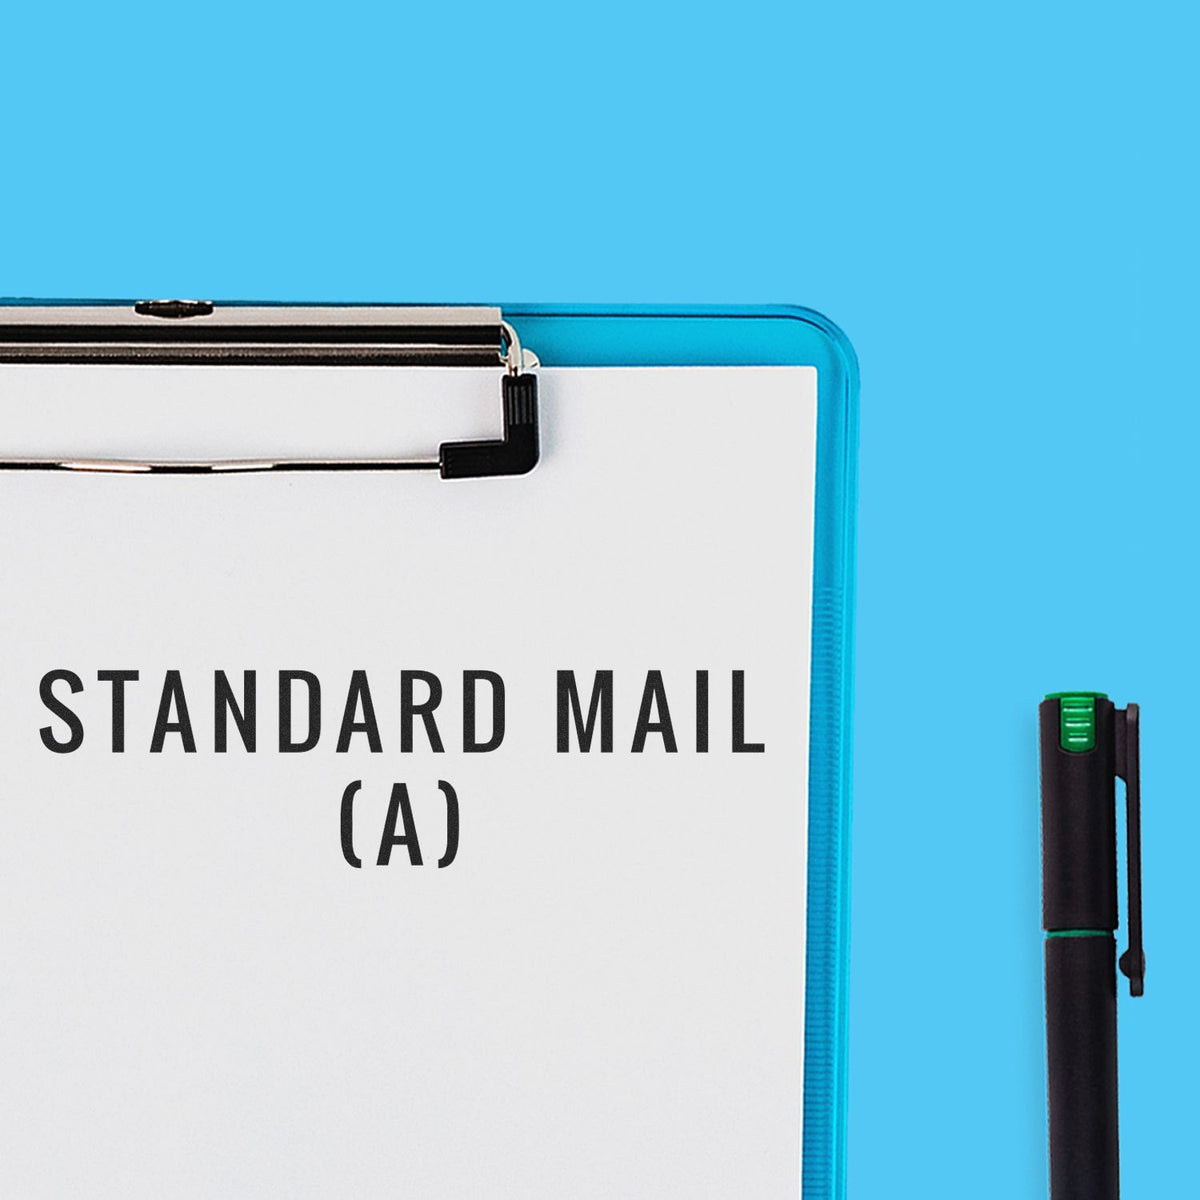 Slim Pre-Inked Standard Mail (A) Stamp Lifestyle Photo